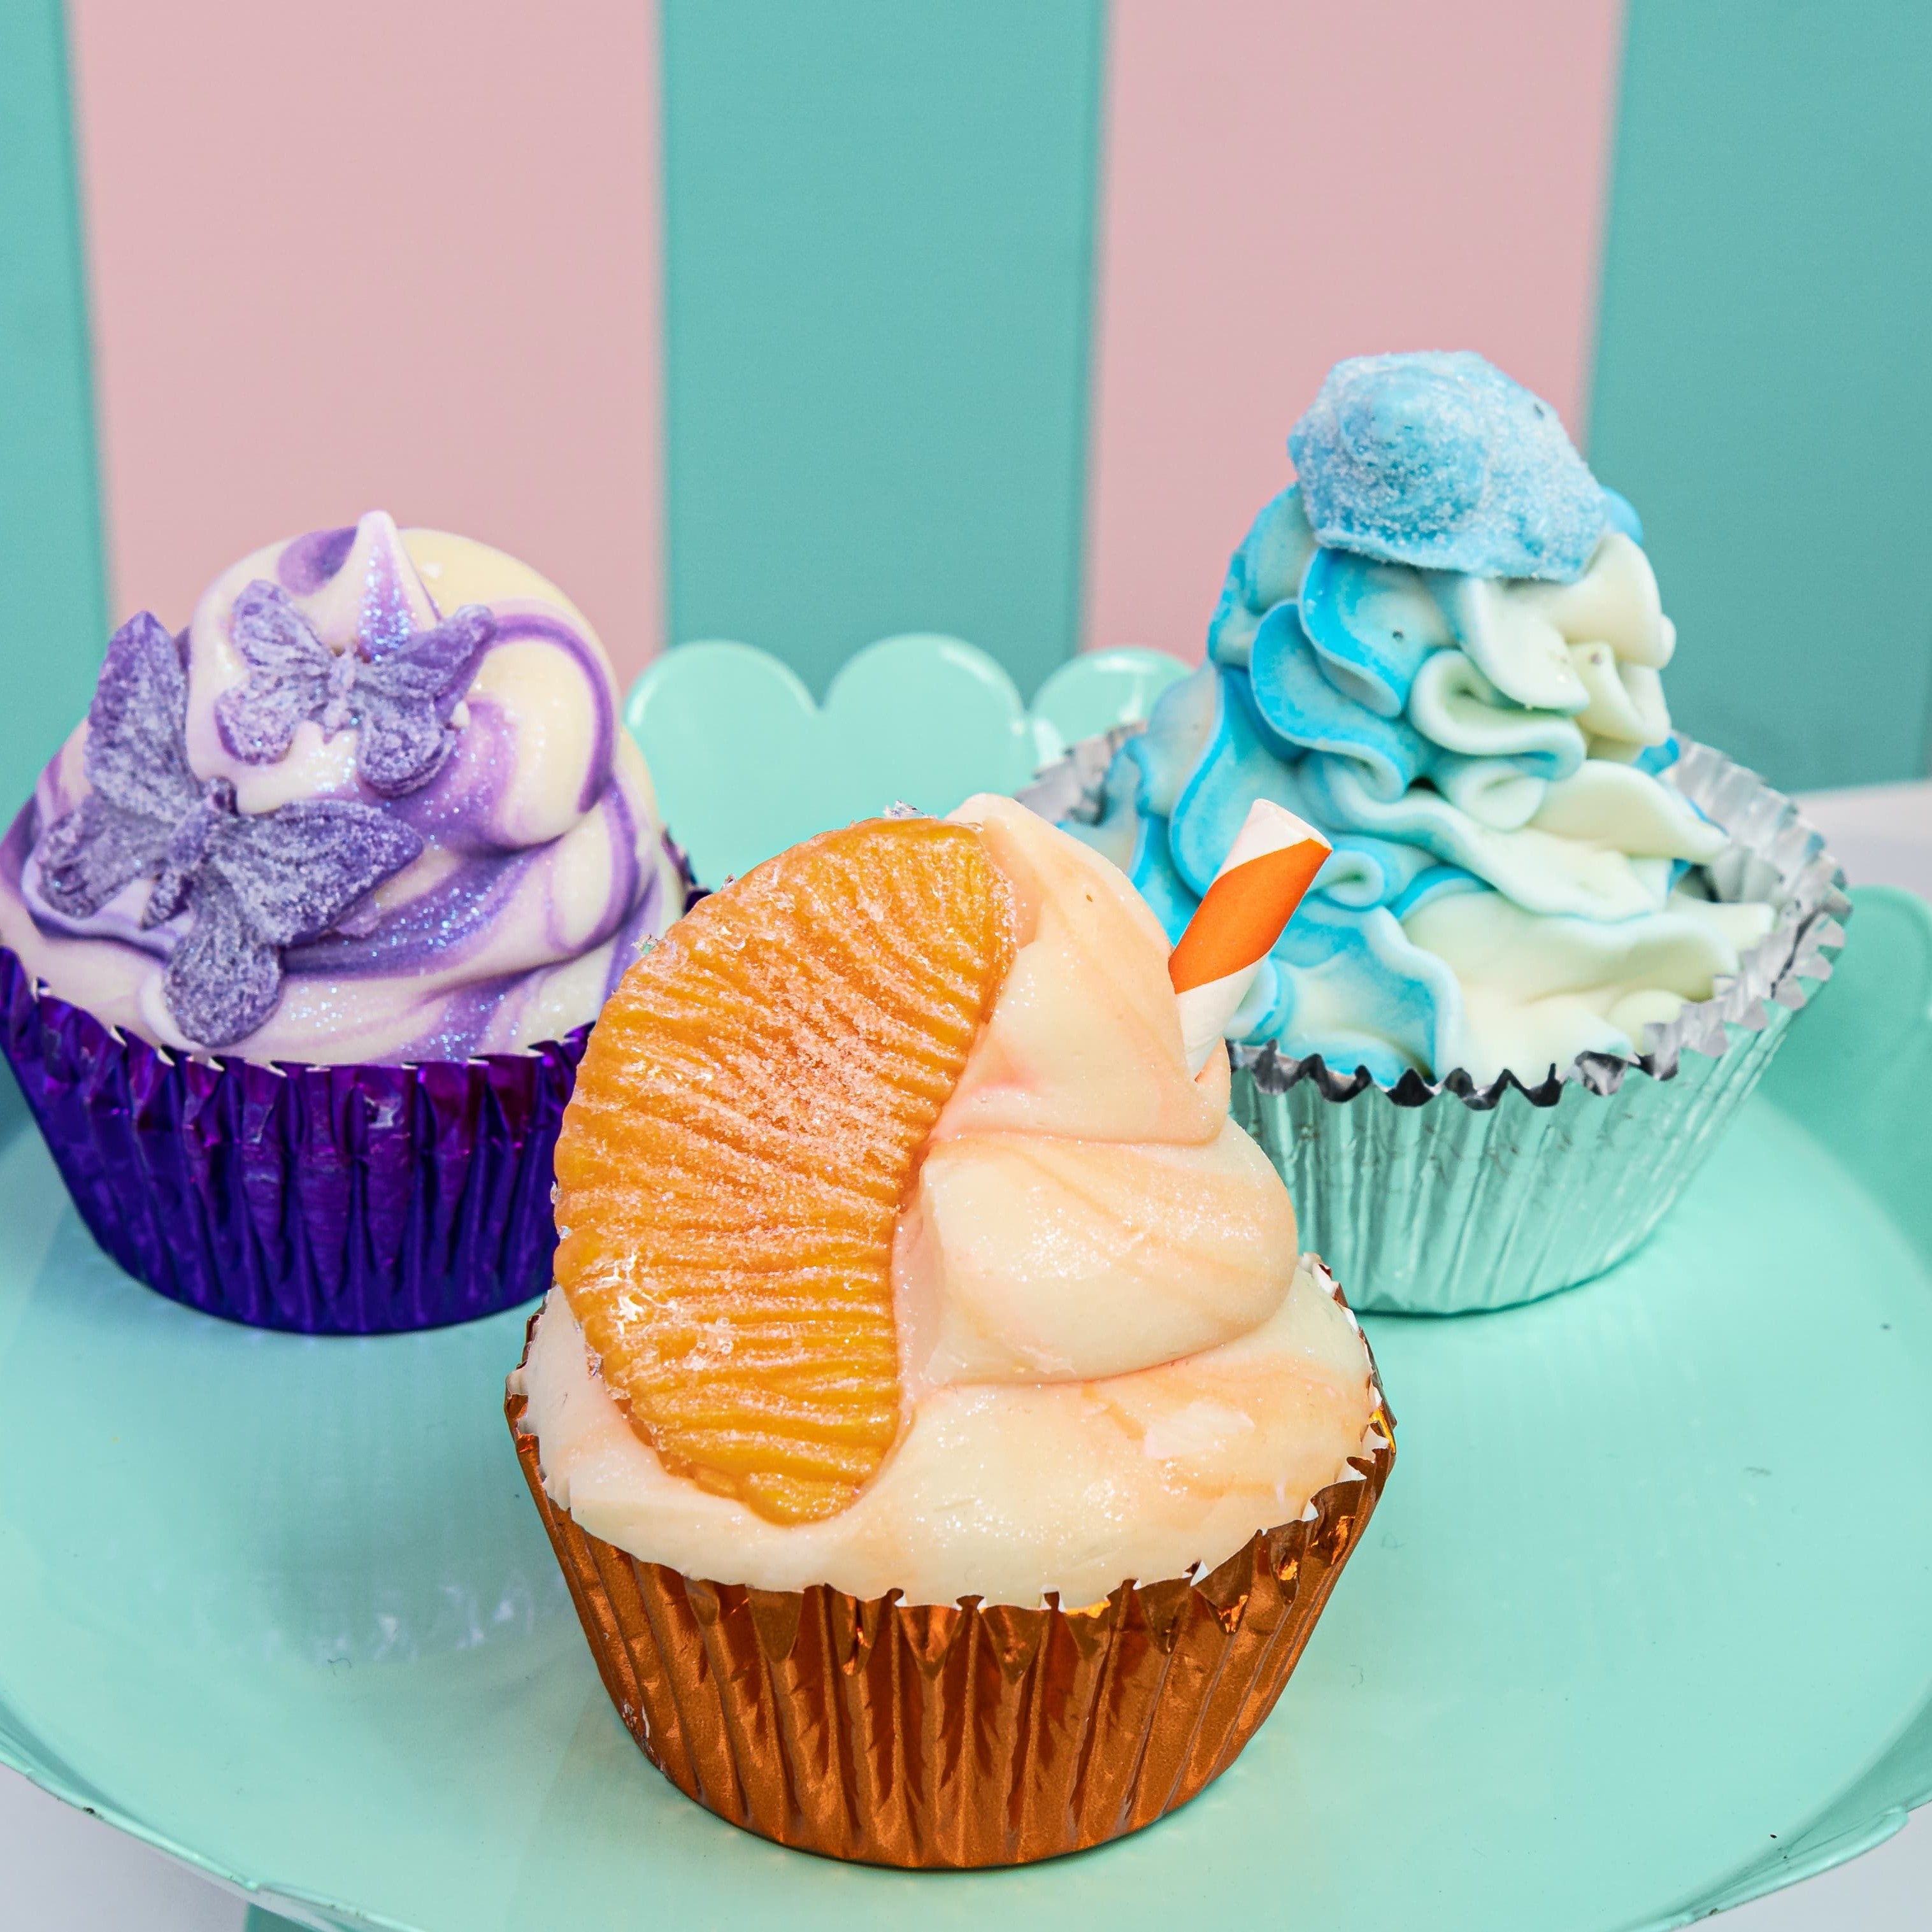 Orange Soda Cupcake Soap and other cupcake shaped soaps.